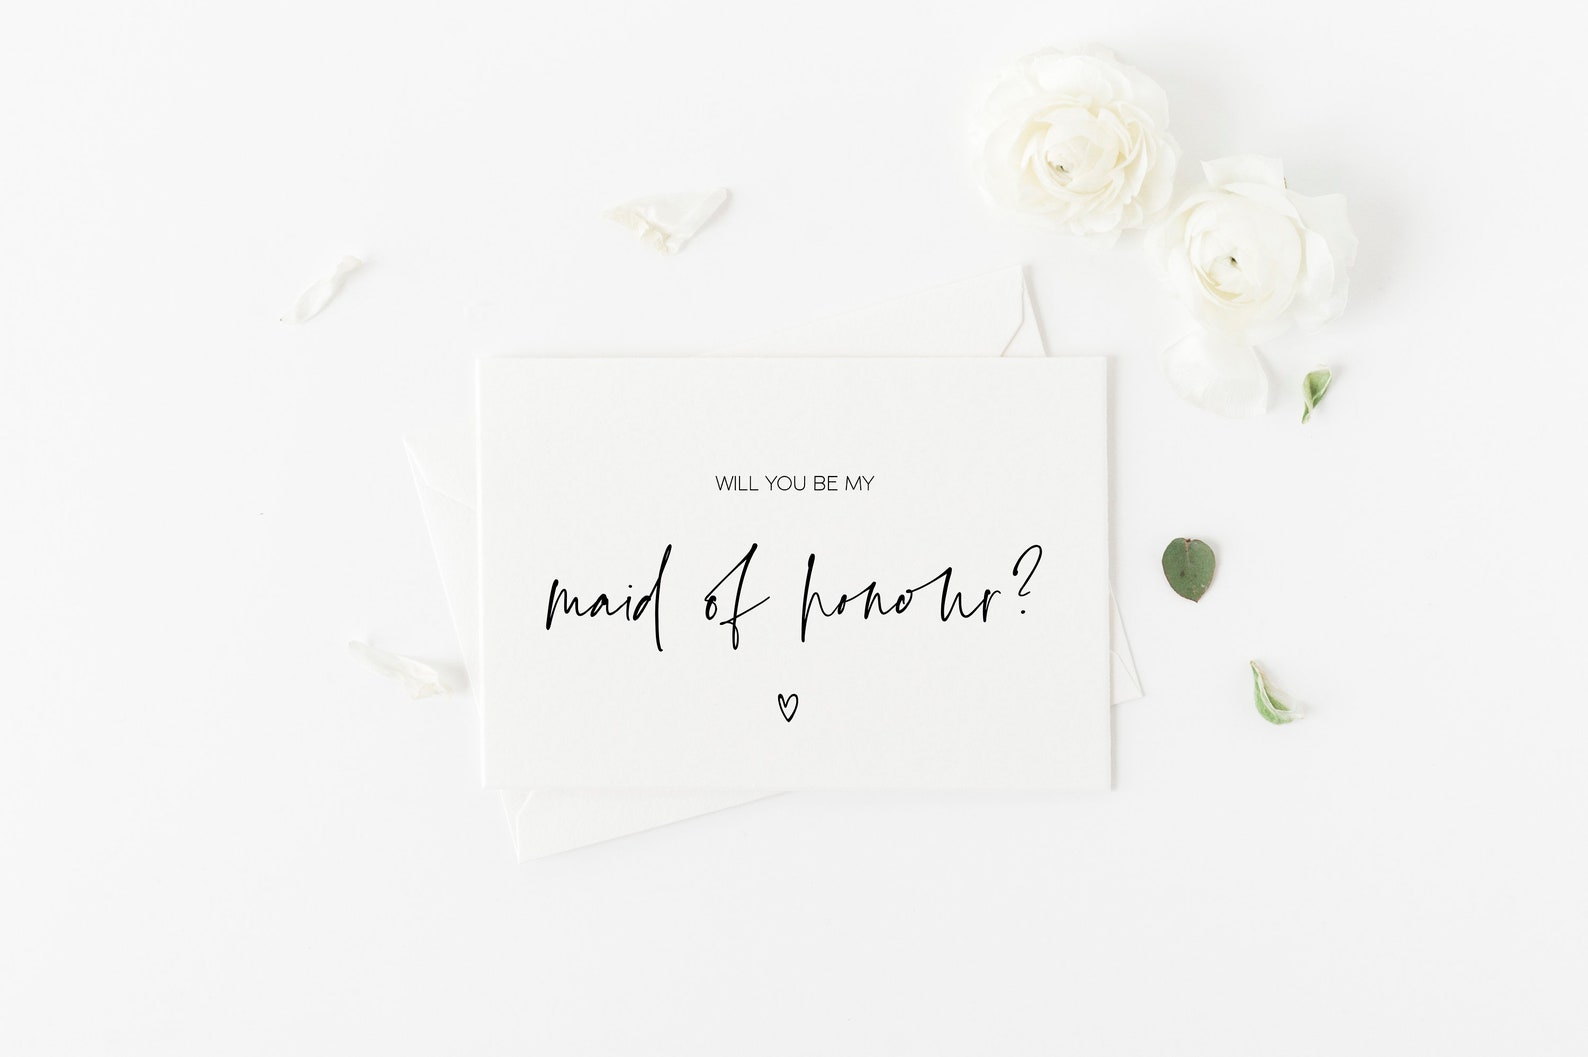 will-you-be-my-maid-of-honor-proposal-card-bridesmaid-asking-etsy